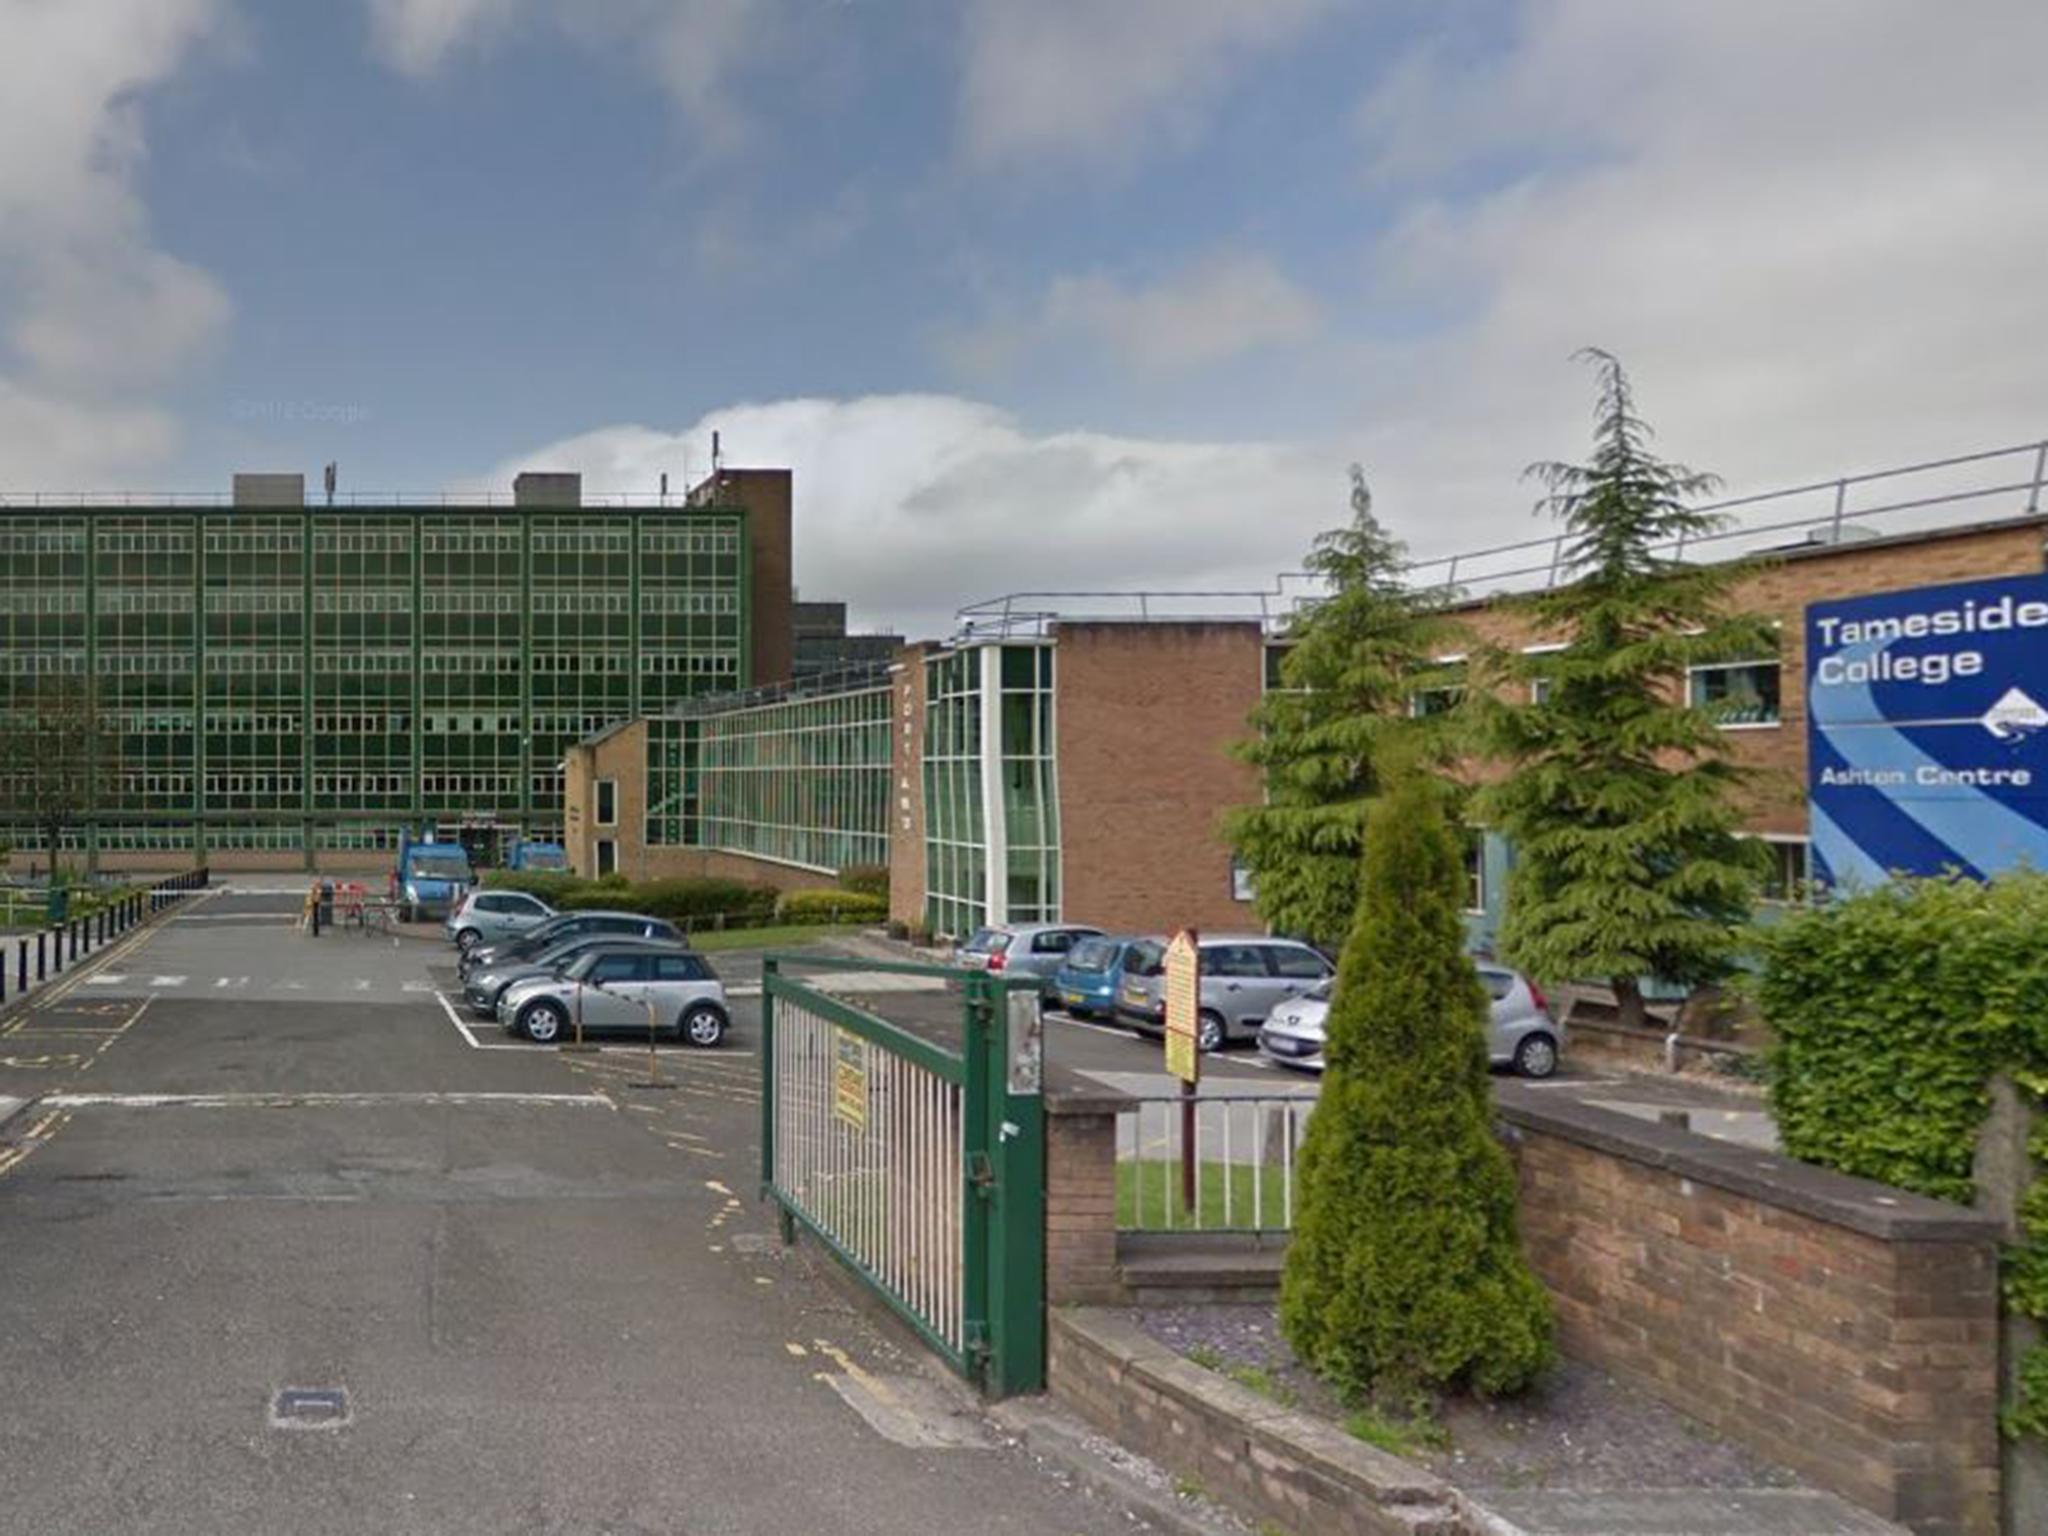 Students and staff at Tameside College were evacuated after the college received a threat on social media